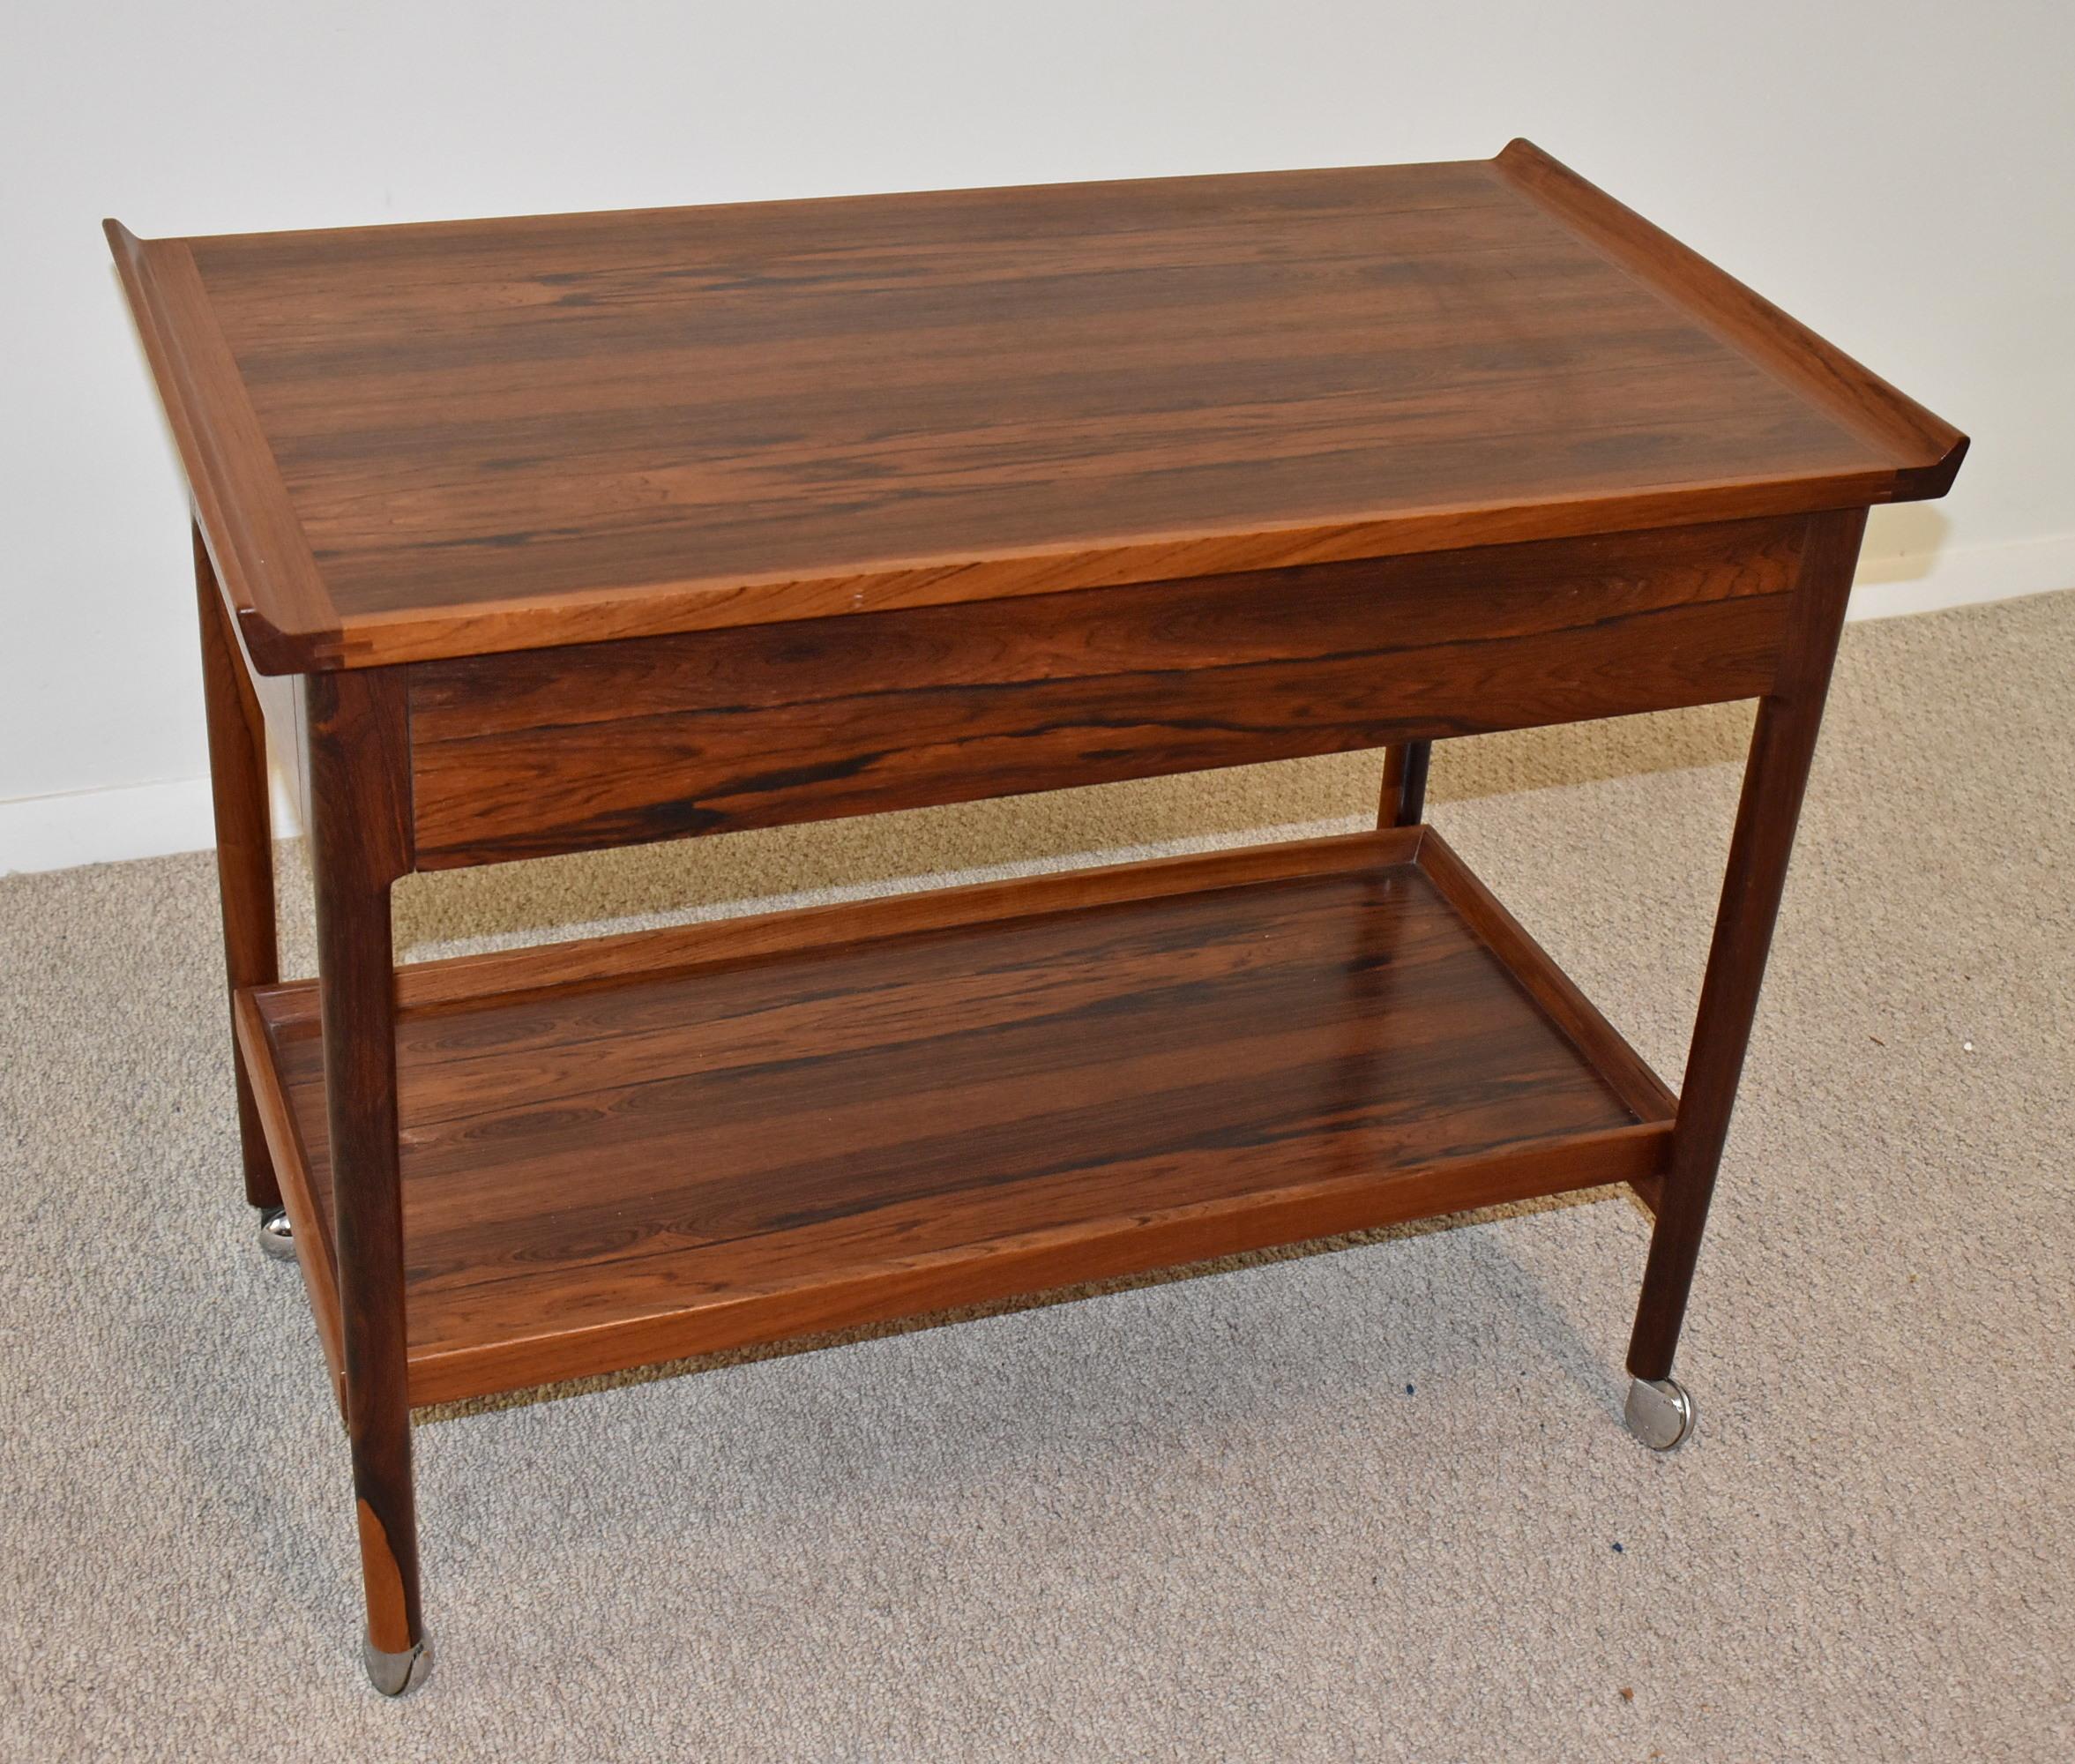 Danish Rosewood Trolley Bar Cart by Torbjorn Afdal (Designer) for Mellemstrands Bruksbo (Maker). Circa 1960-1969. Mid-Century Modern double drawer rosewood bar cart, contoured handles and turned legs with lower tray that acts as a shelf. Well